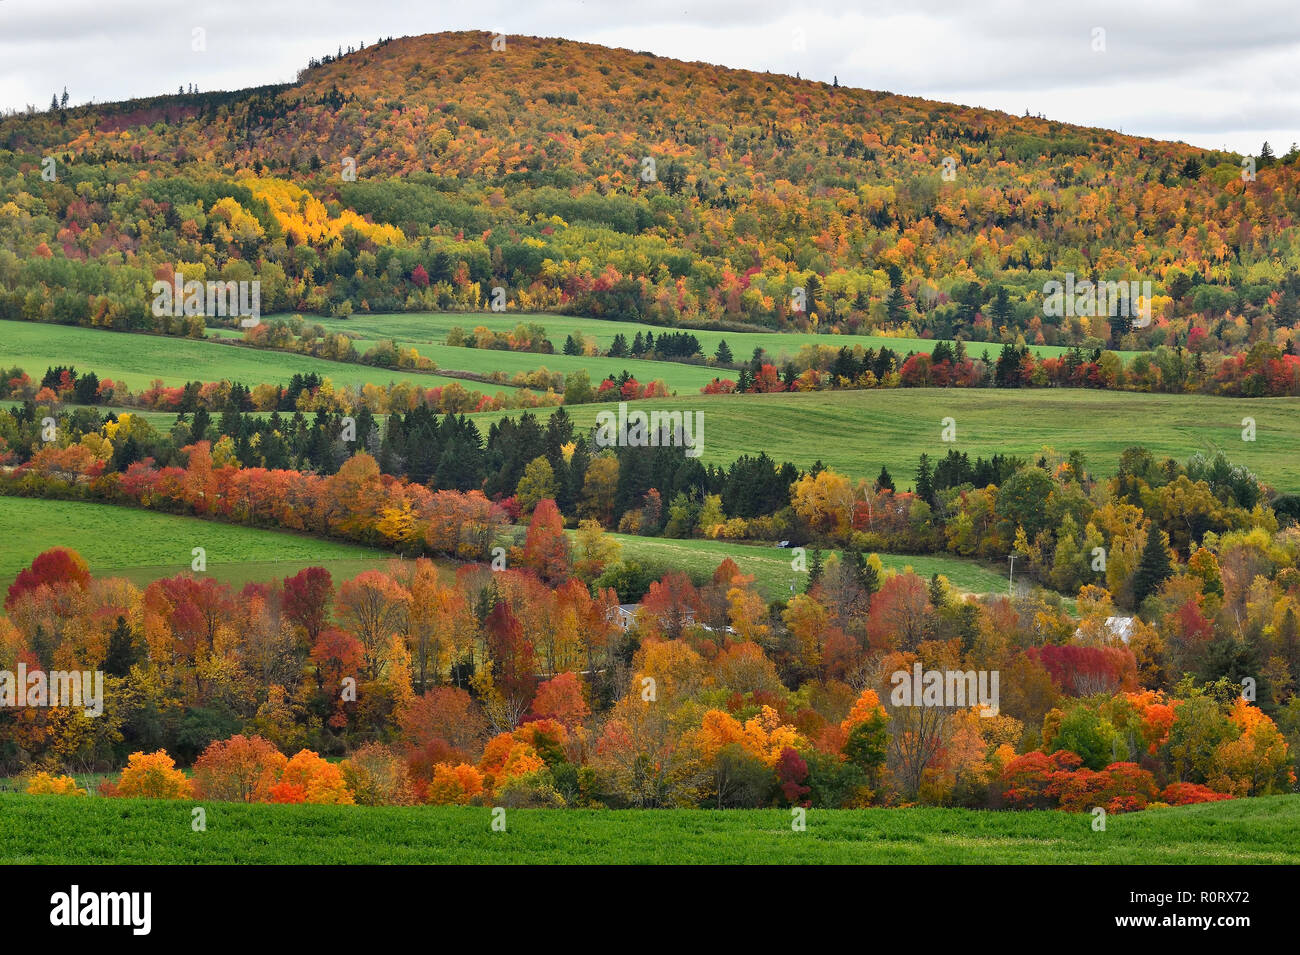 An autumn landscape image of farm fields separated by rows of deciduous trees with their leaves changing to the colors of fall near Sussex N.B. Stock Photo